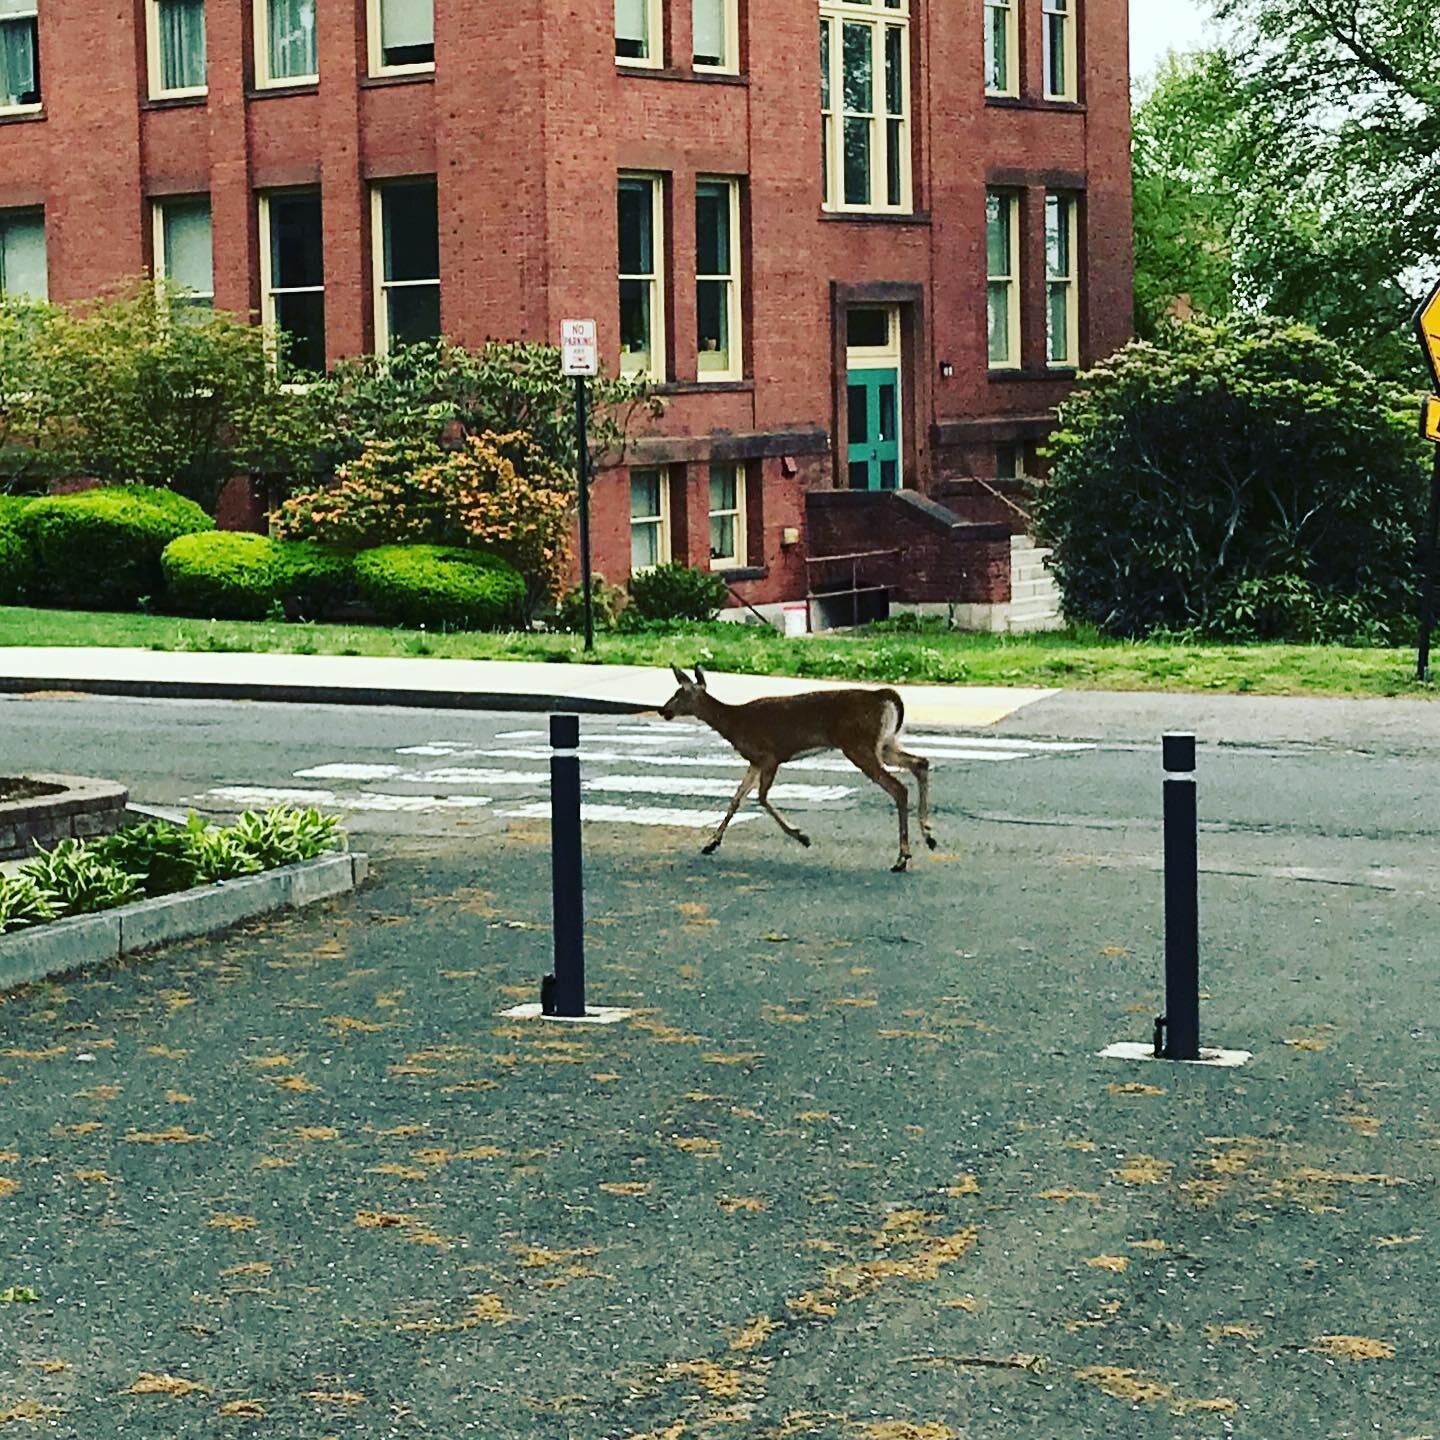 Spotted on Round Hill this morning ... #roundhillnoho #northamptonma #westernma #deer #pioneervalley